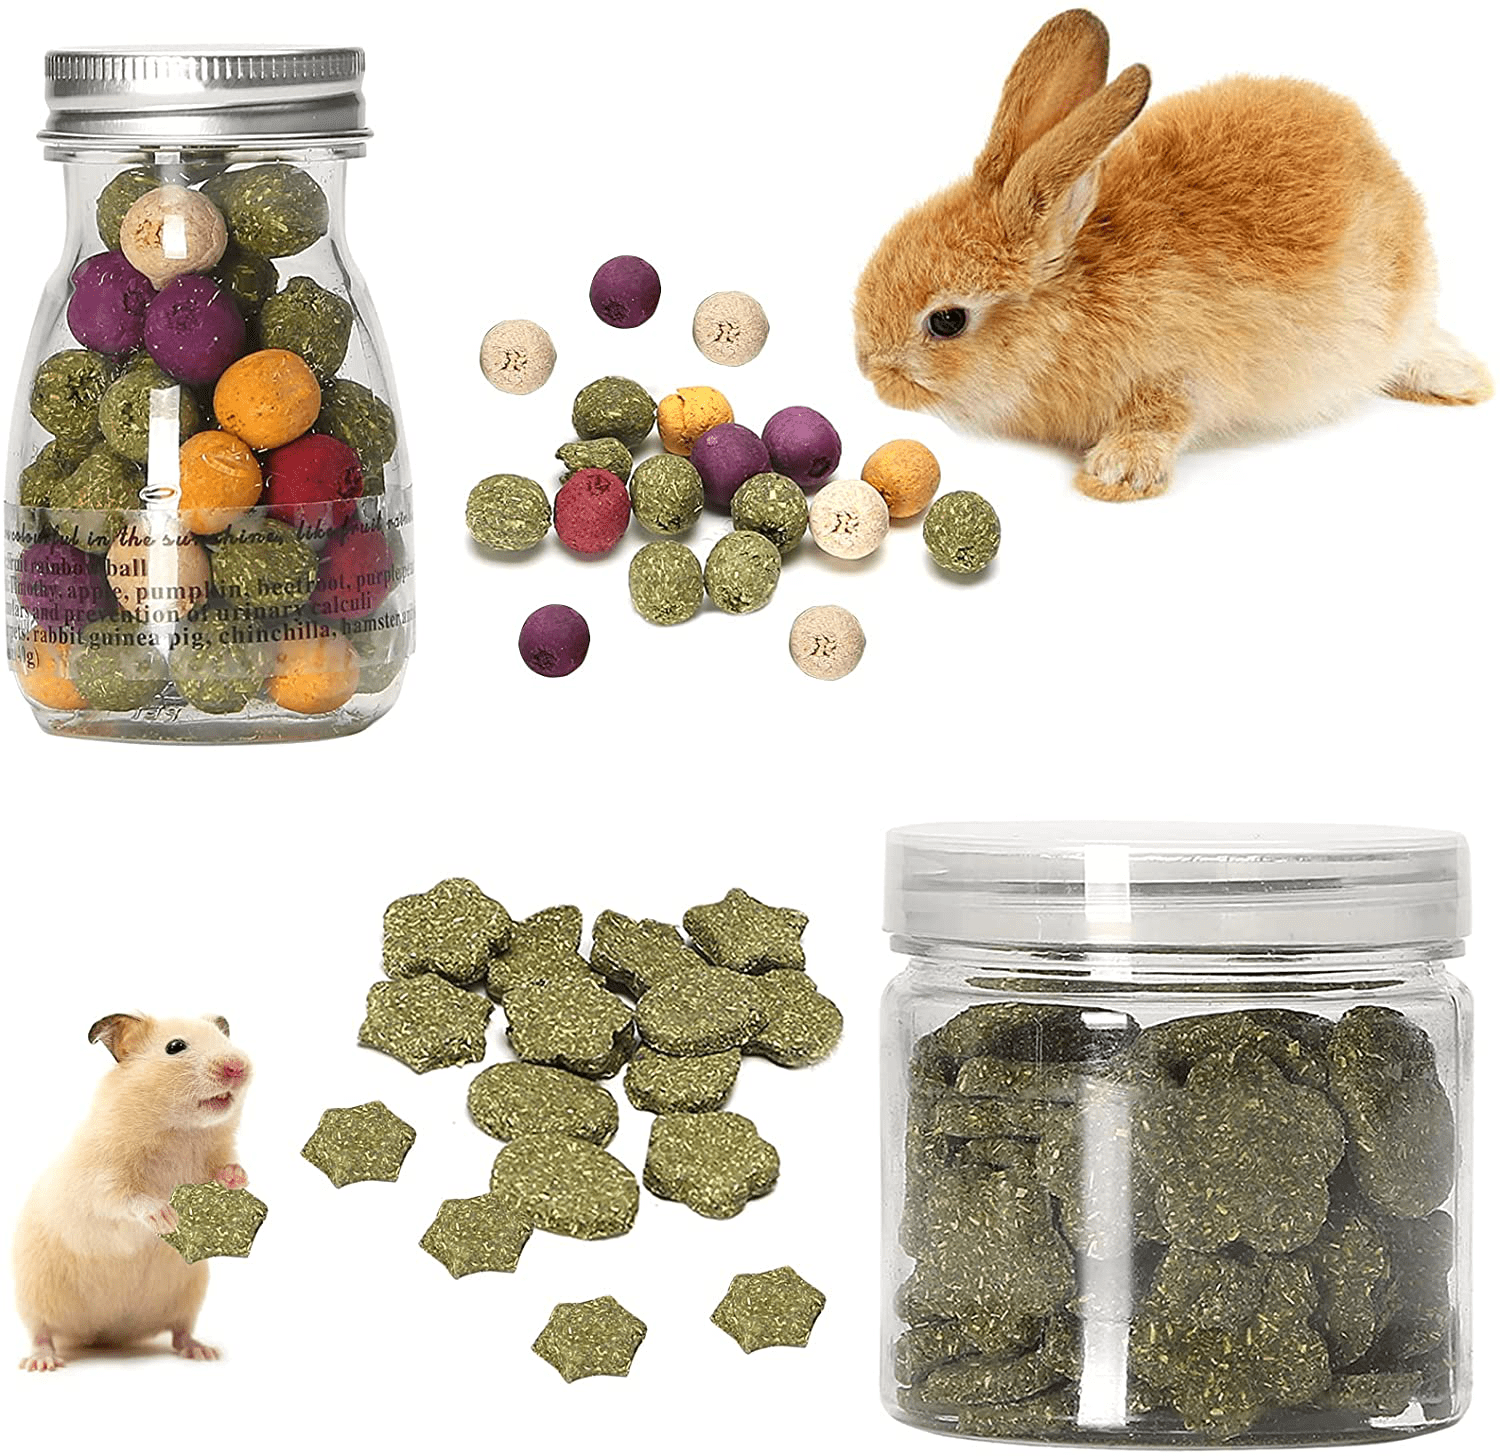 X-Pet Rabbit Chew Toys, Guinea Pig Treats 100% Natural Material Garden Stuff Flavored Biscuit&Grass Cake, Small Animals Teeth Grinding Chewing Suitable for Bunny Hamster Chinchilla Dwarf Gerbils Animals & Pet Supplies > Pet Supplies > Small Animal Supplies > Small Animal Food X-pet style2  